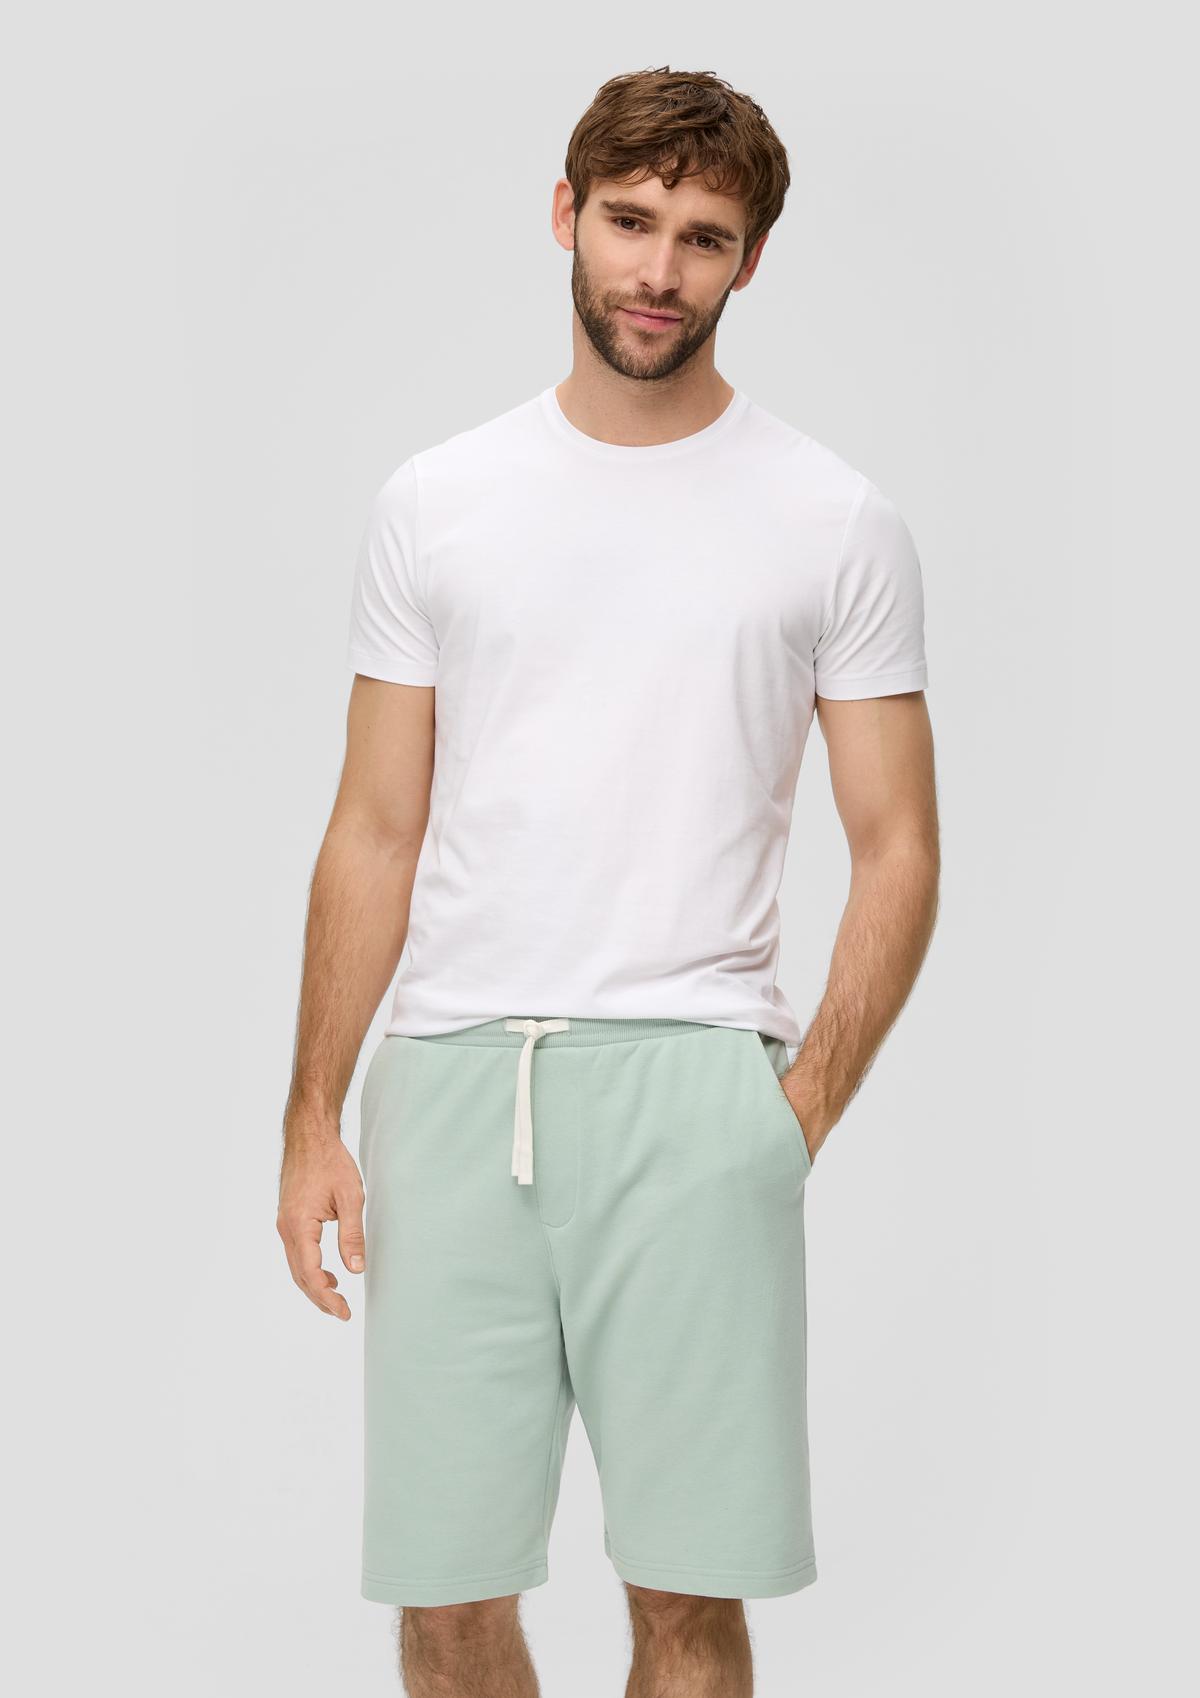 Relaxed fit: sweat shorts with an elasticated waistband